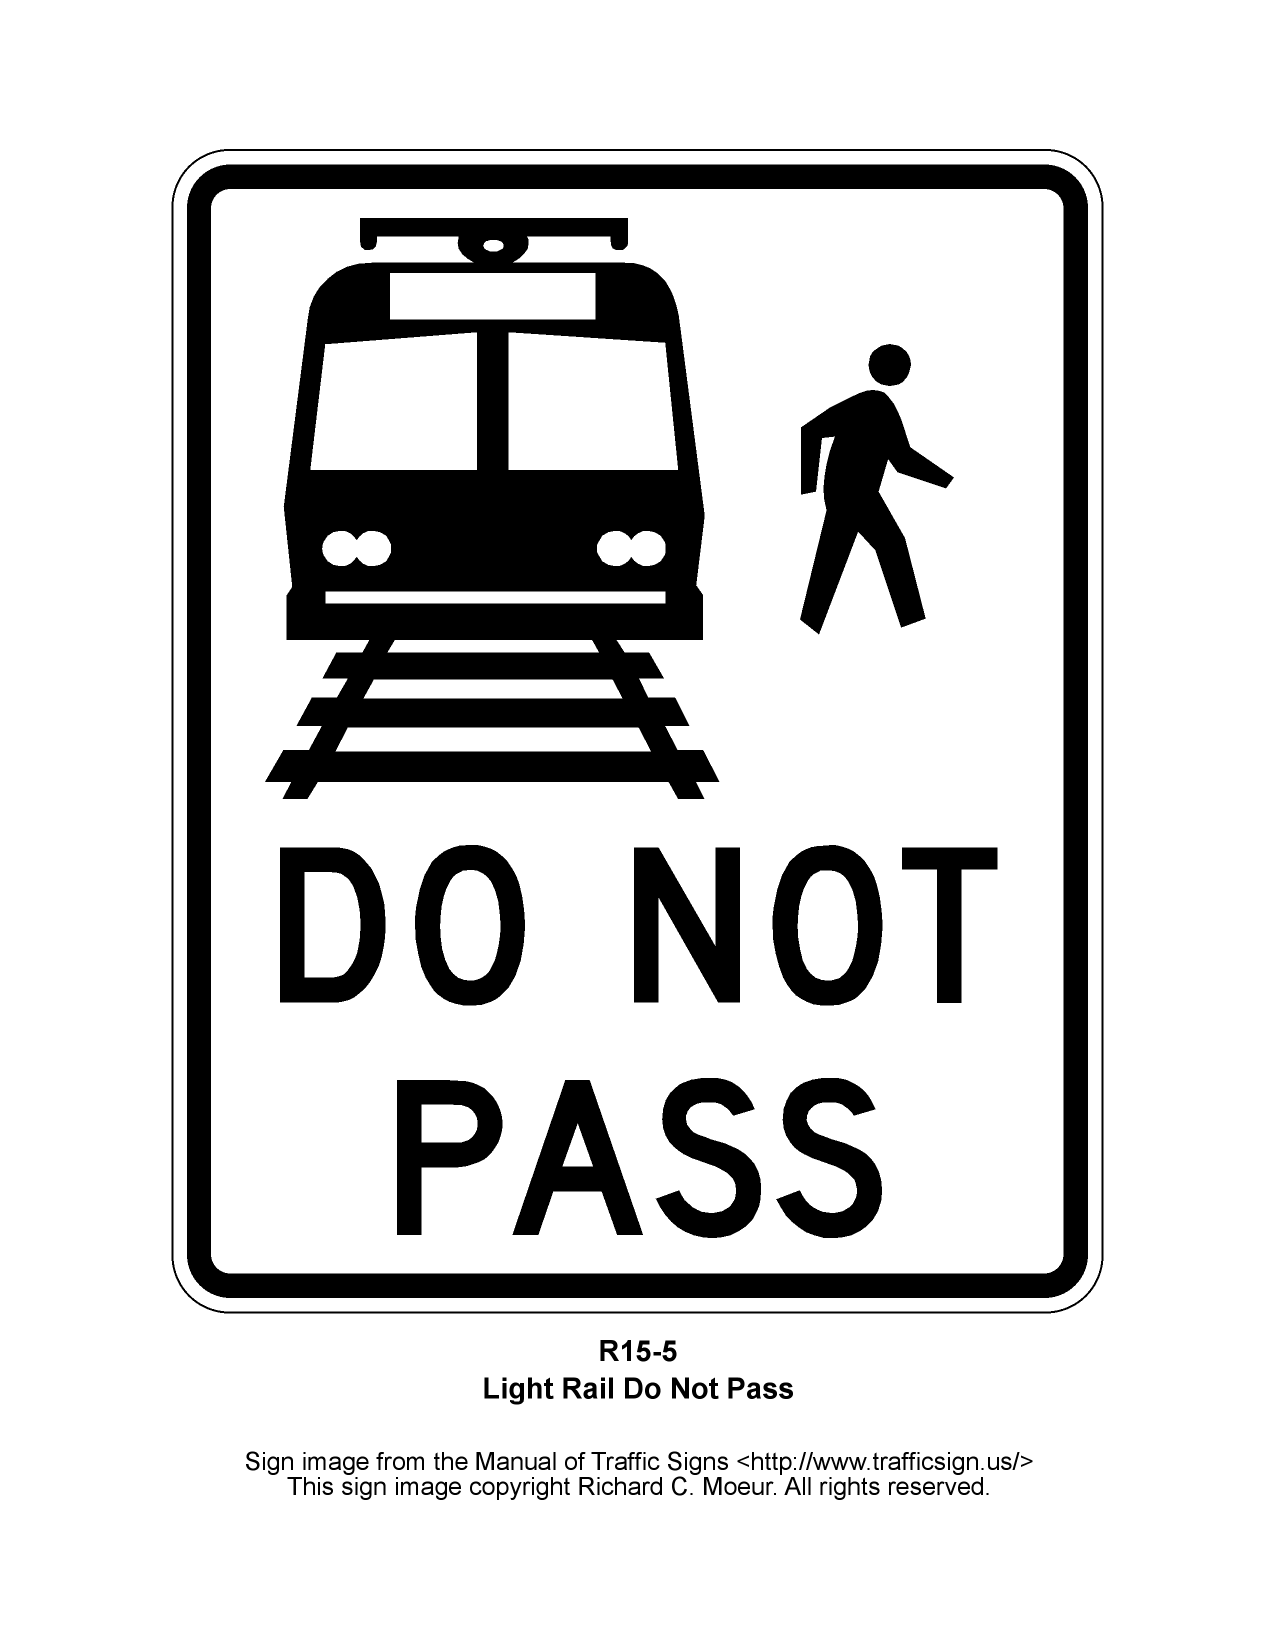 Manual of Traffic Signs - R15 Series Signs